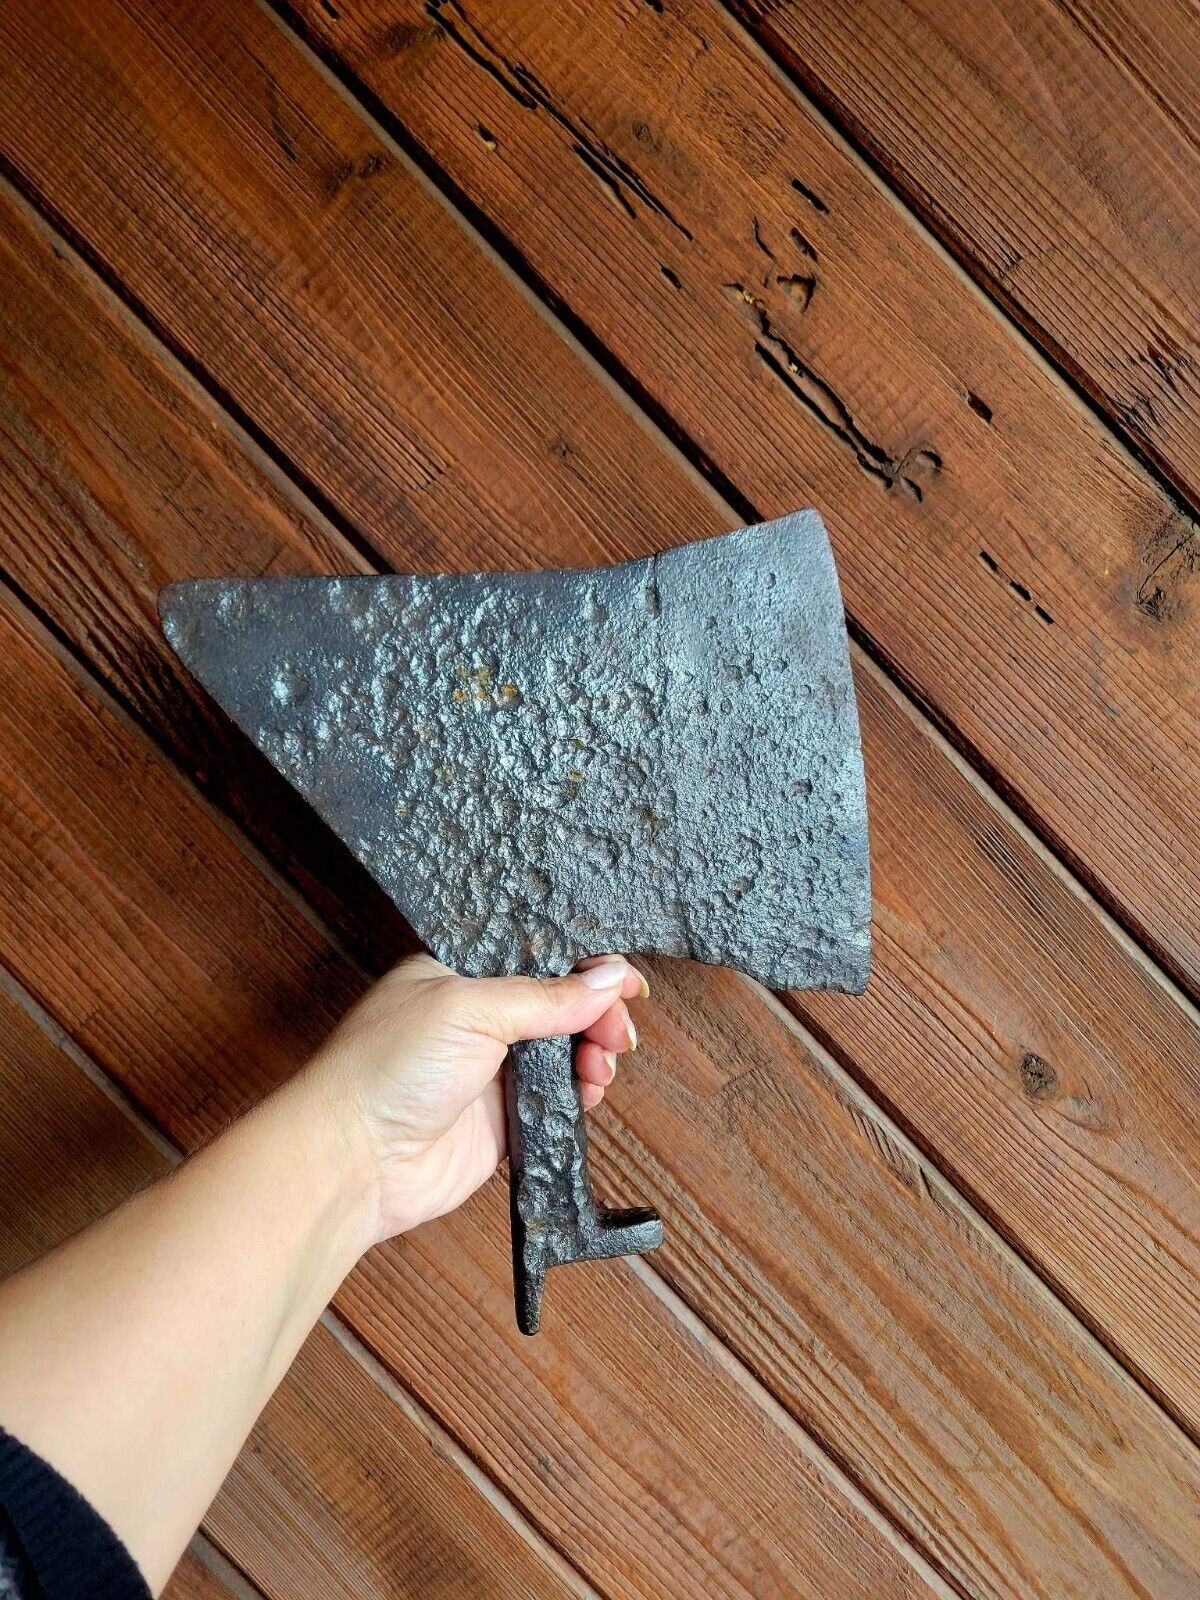 Antique Extremely Old Hand Forged Axe Edge Tool Food Chopper Cleaver or Knife 